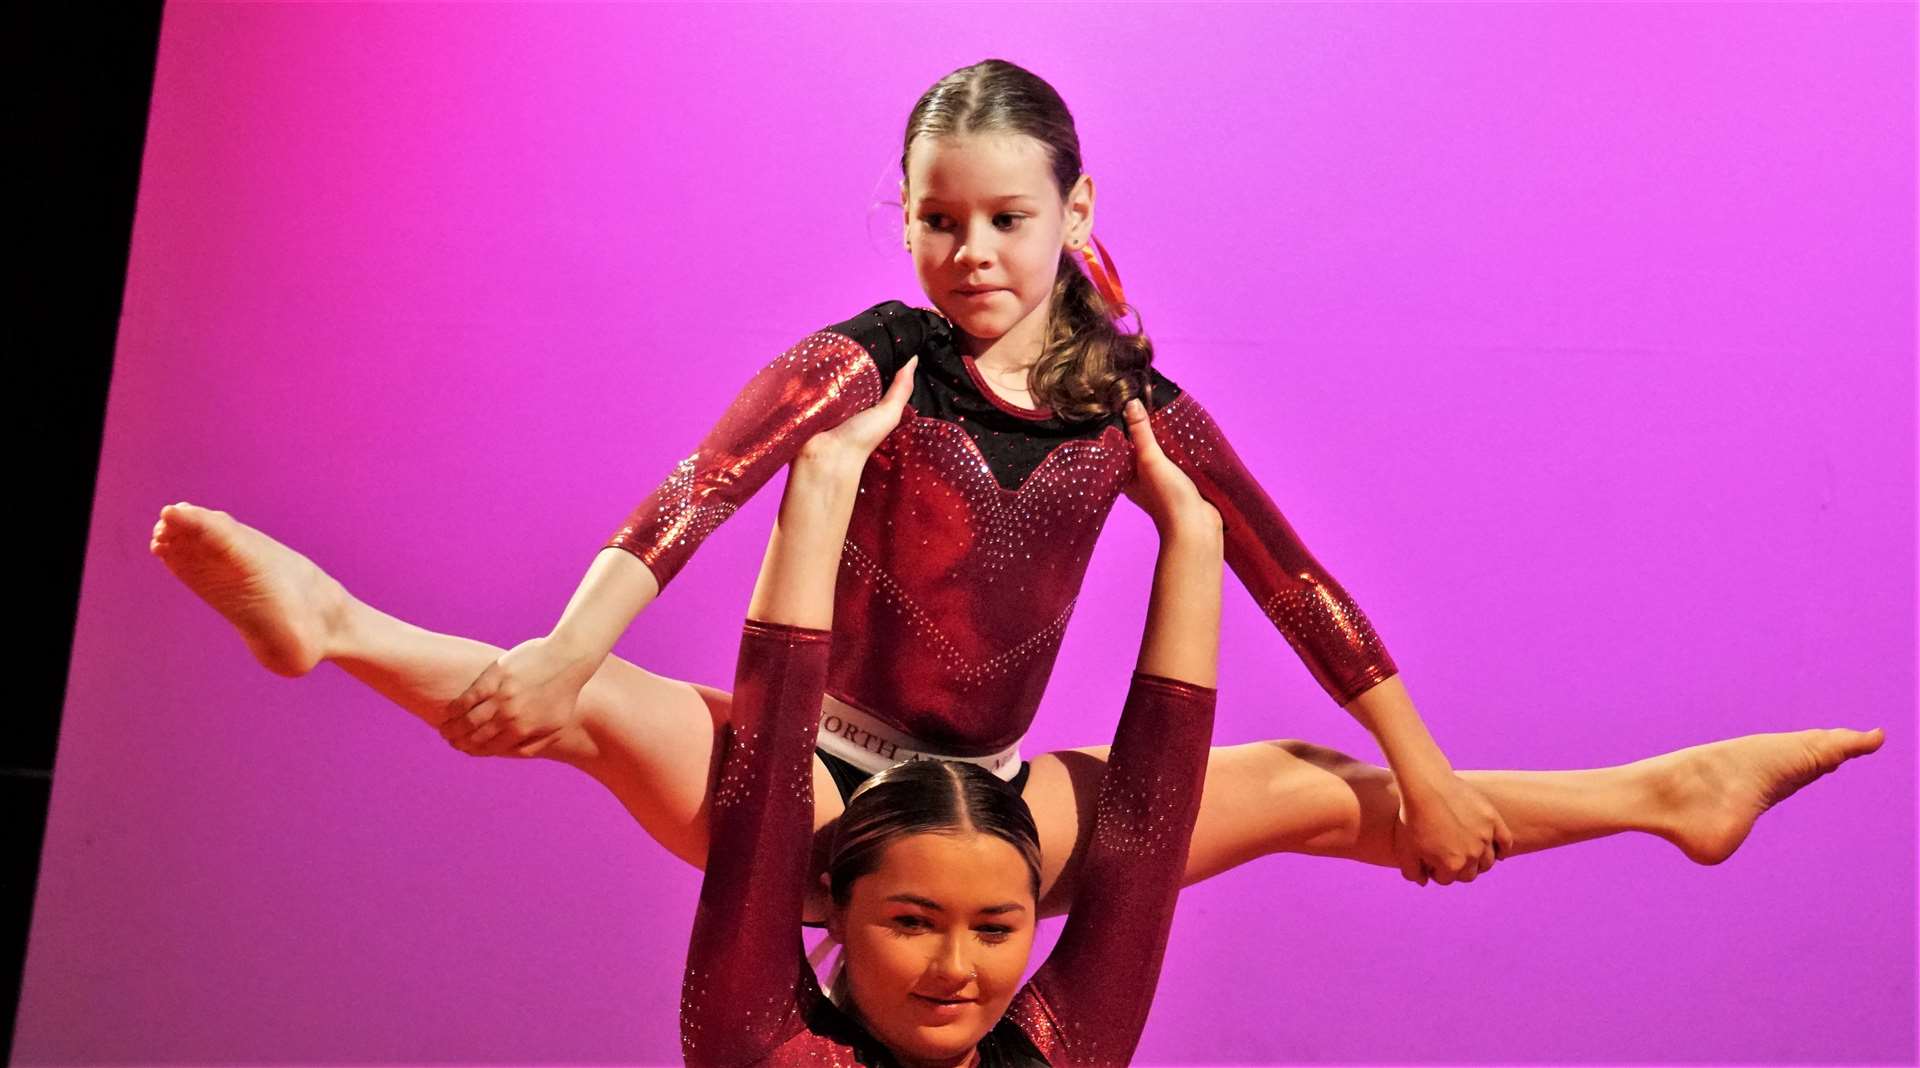 North Apex Gymnastics Club Summer Show 2023 at Wick Assembly Rooms on June 1. Picture: DGS